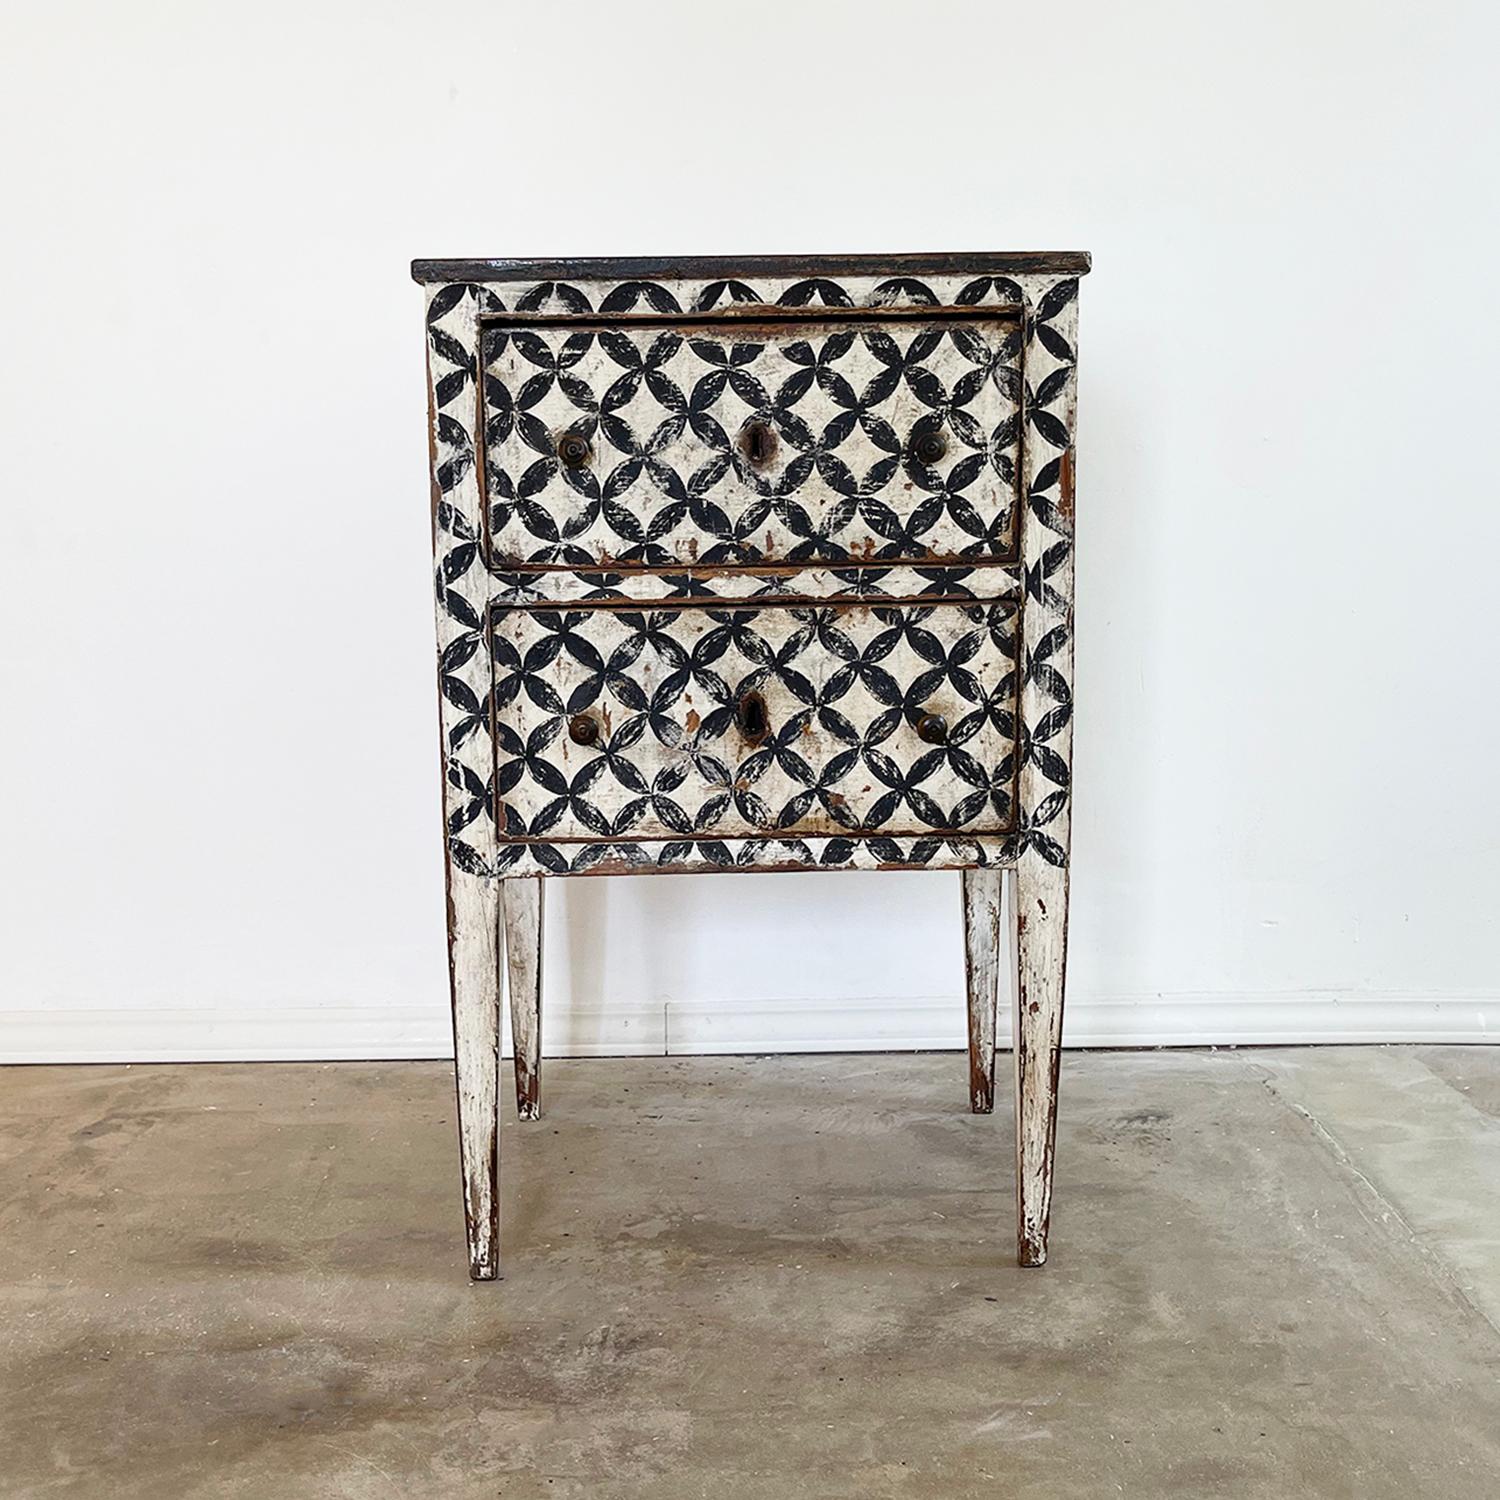 Late 19th Century, a Louis XVI small commode, Arte Povera, with two drawers and original knobs in legno laccato painted white-grey with a dark geometrical pattern. The detailed single nightstand, bed side table is made of hand crafted painted